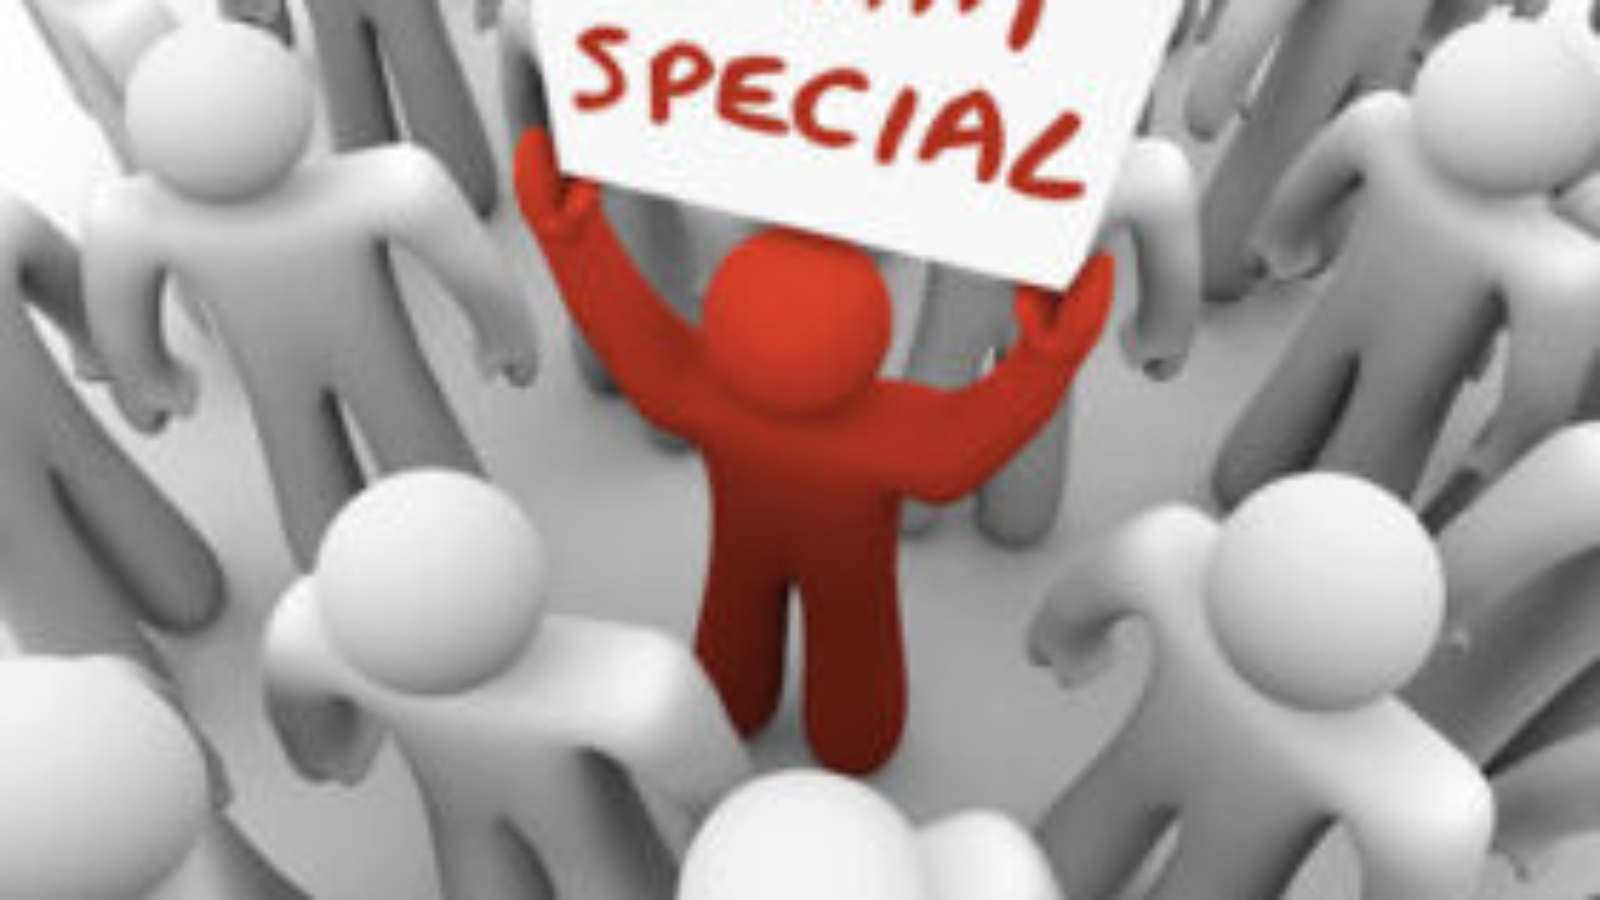 I Am Special words on a sign held by a man in a crowd standing out as different, unique, exceptional, rare or uncommon as the best choice to hire for a job, choose for an assignment or pick for a task